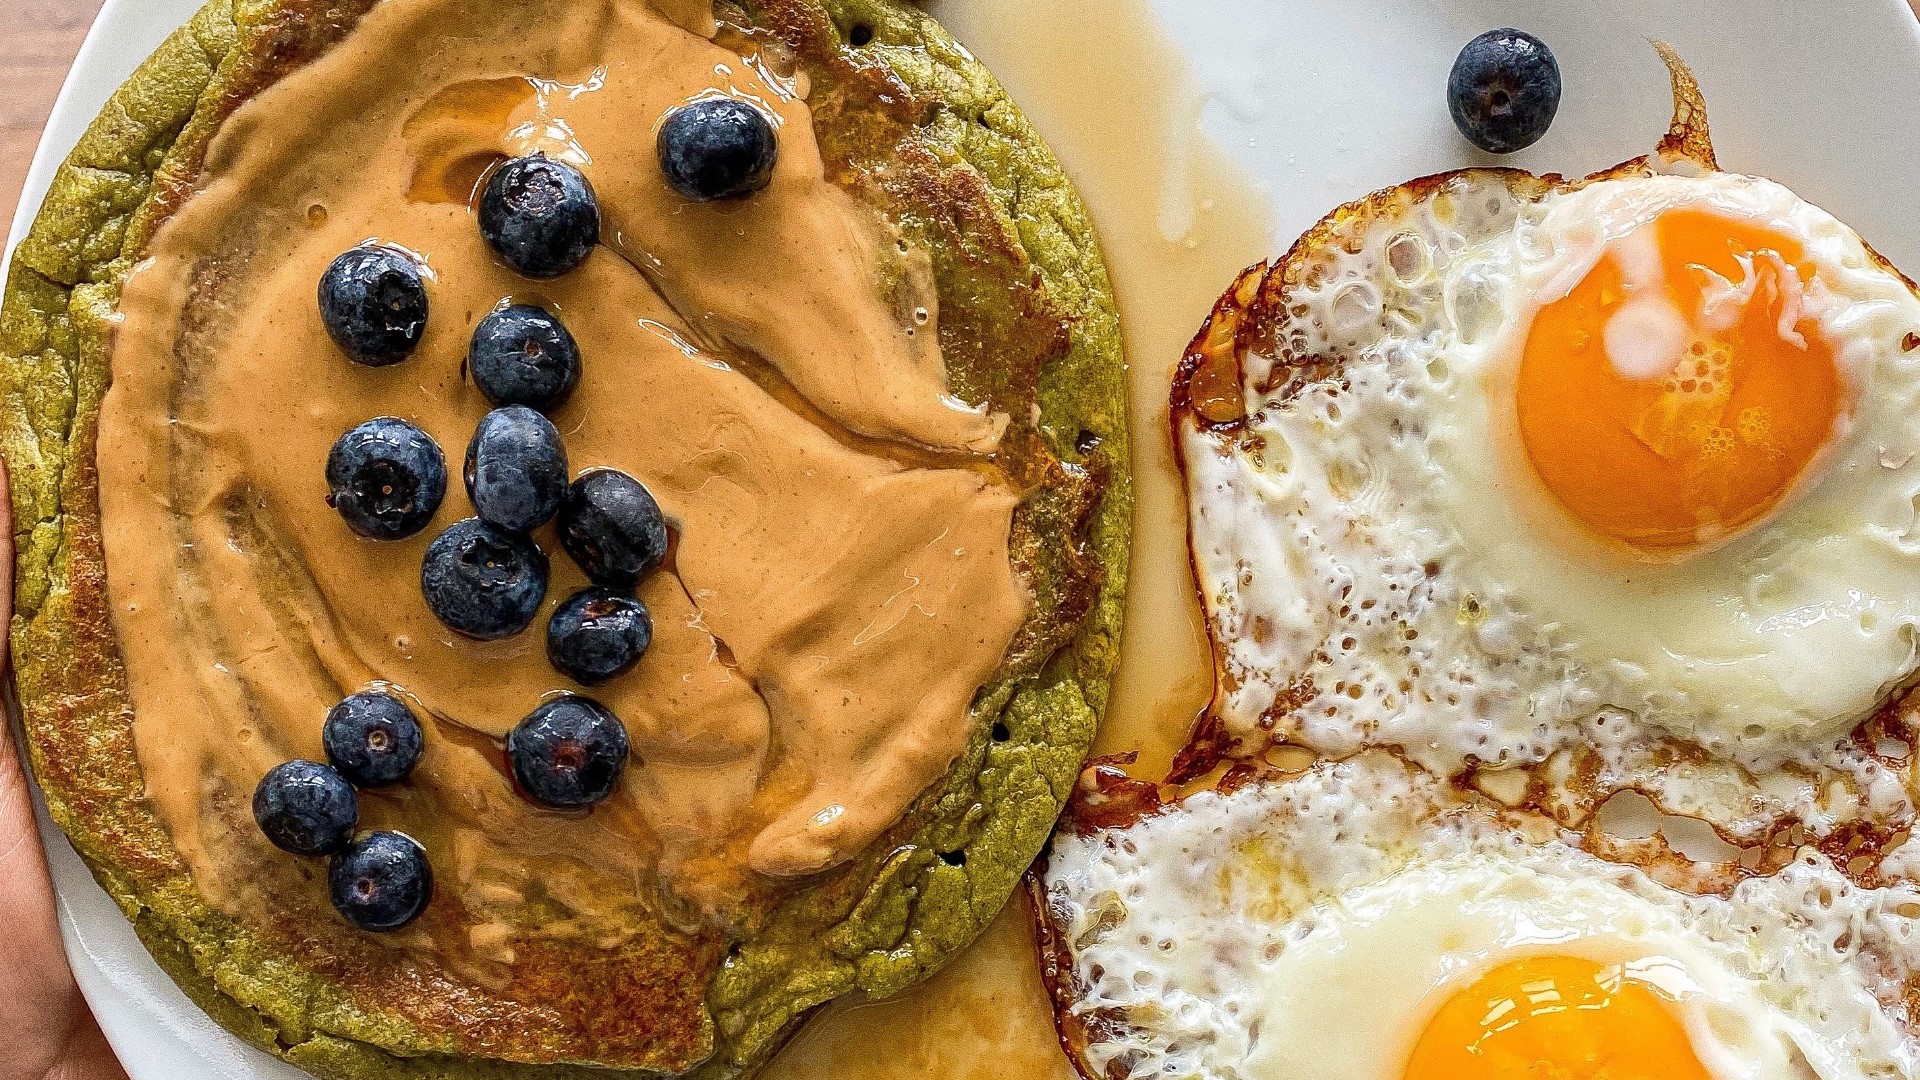 Made in a blender these pancakes are delicious, healthy, and easy to make. Nutrition Coach Lauren Chambers shares the recipe with us.